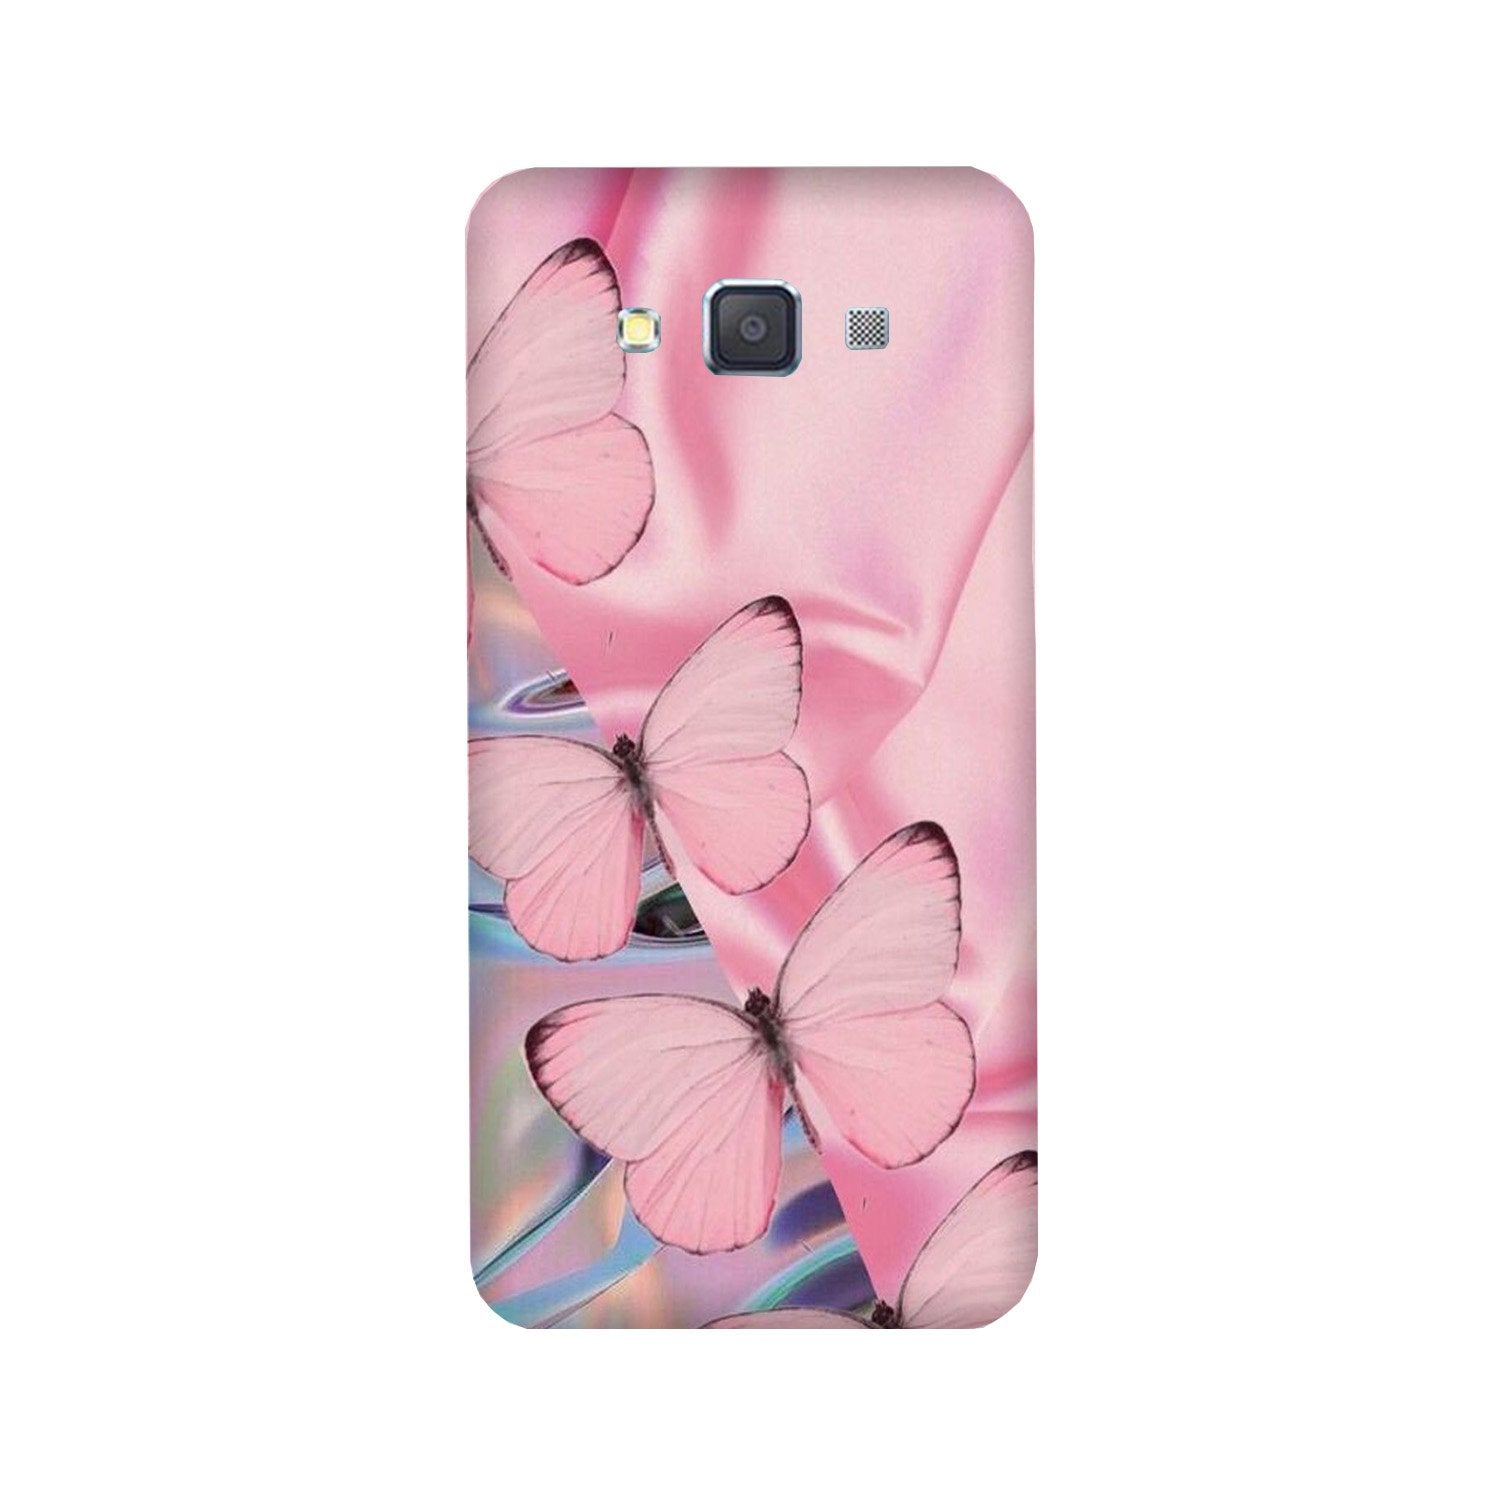 Butterflies Case for Galaxy ON5/ON5 Pro